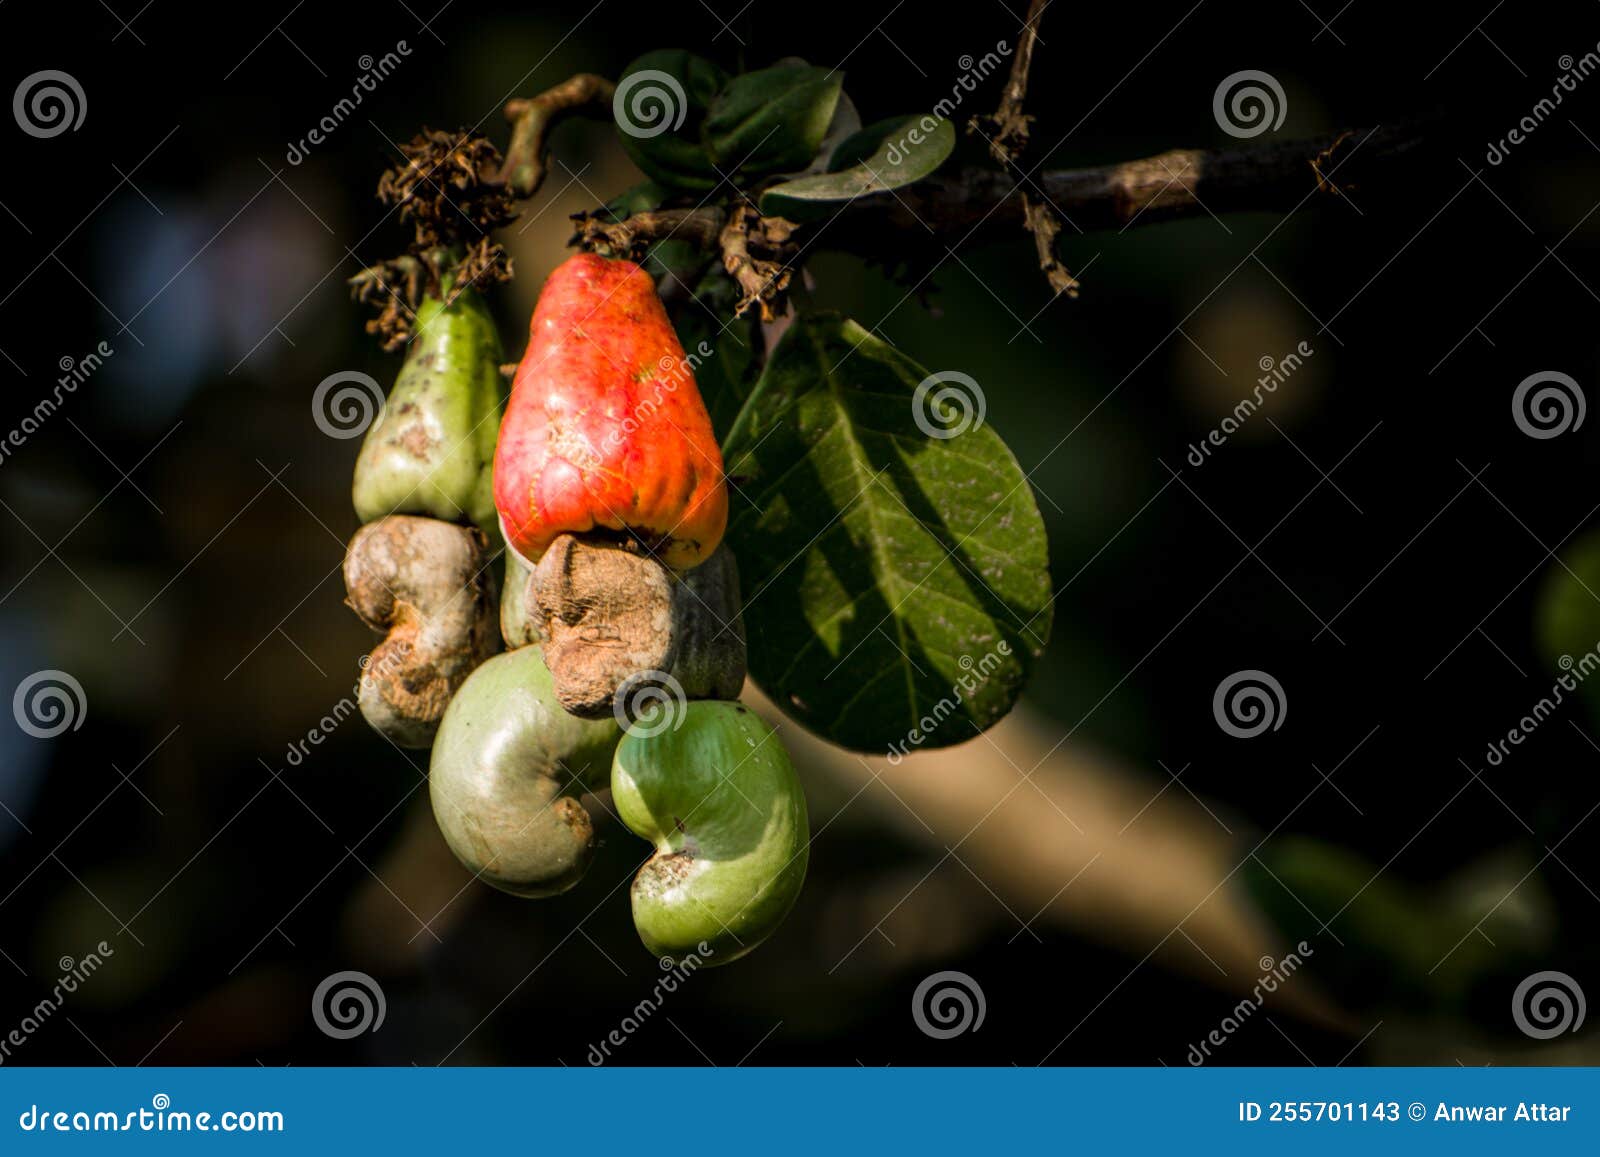 closeup shot of raw cashewnuts hanging on the branch with its fruit